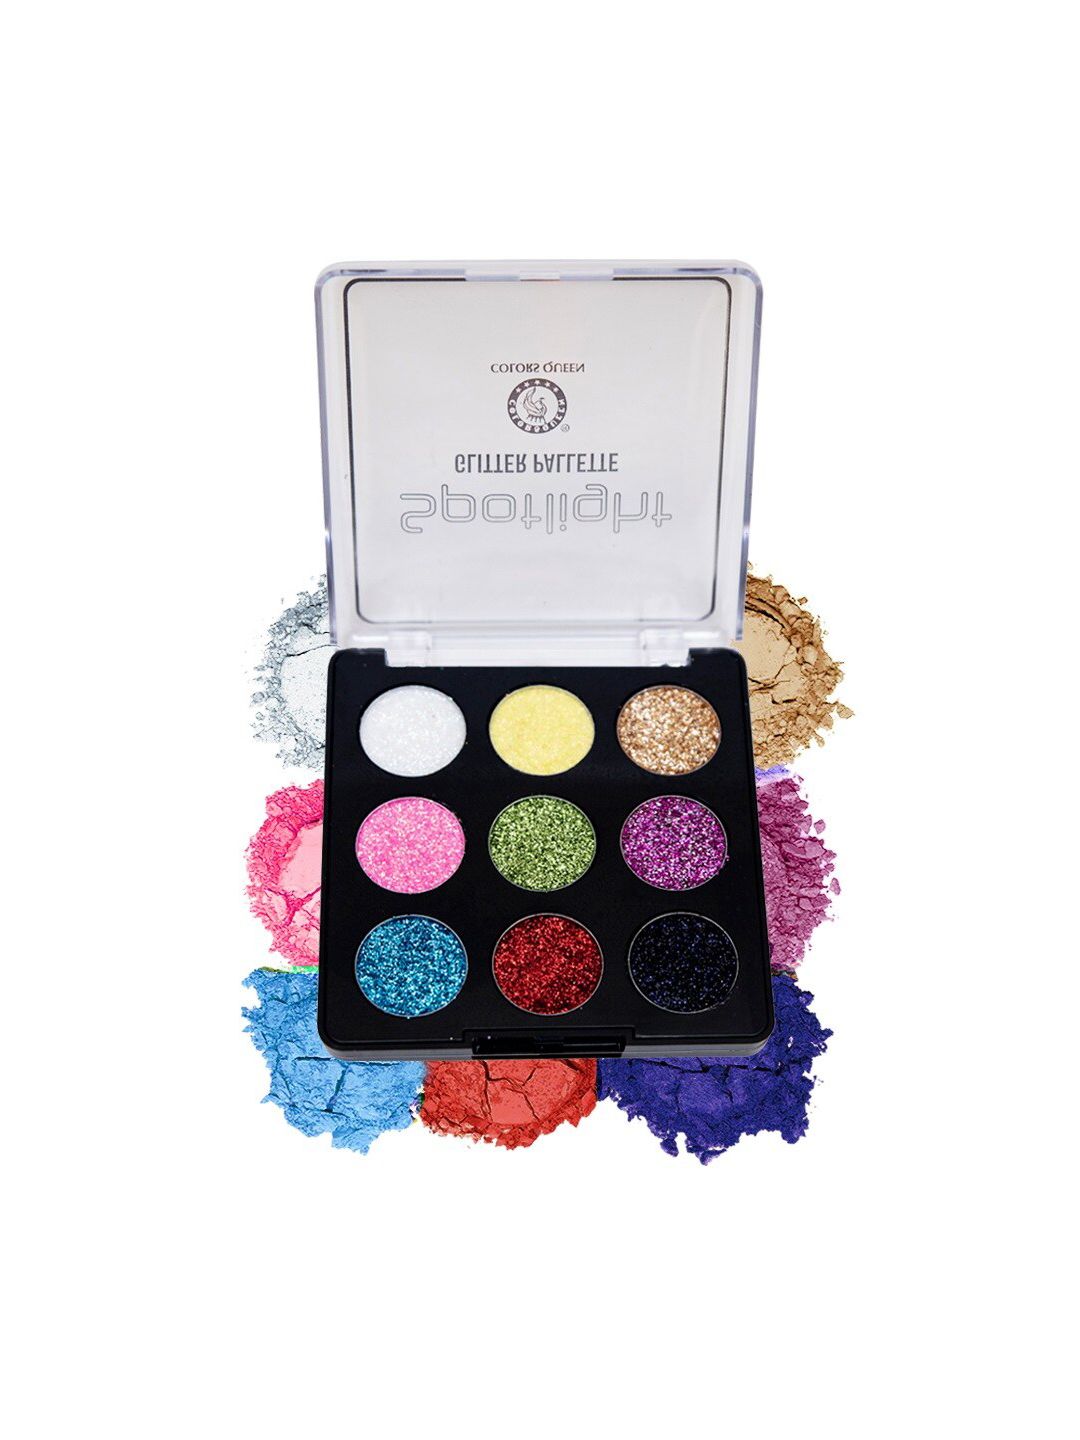 Colors Queen Spotlight Glitter Eyeshadow Palette -14g Price in India